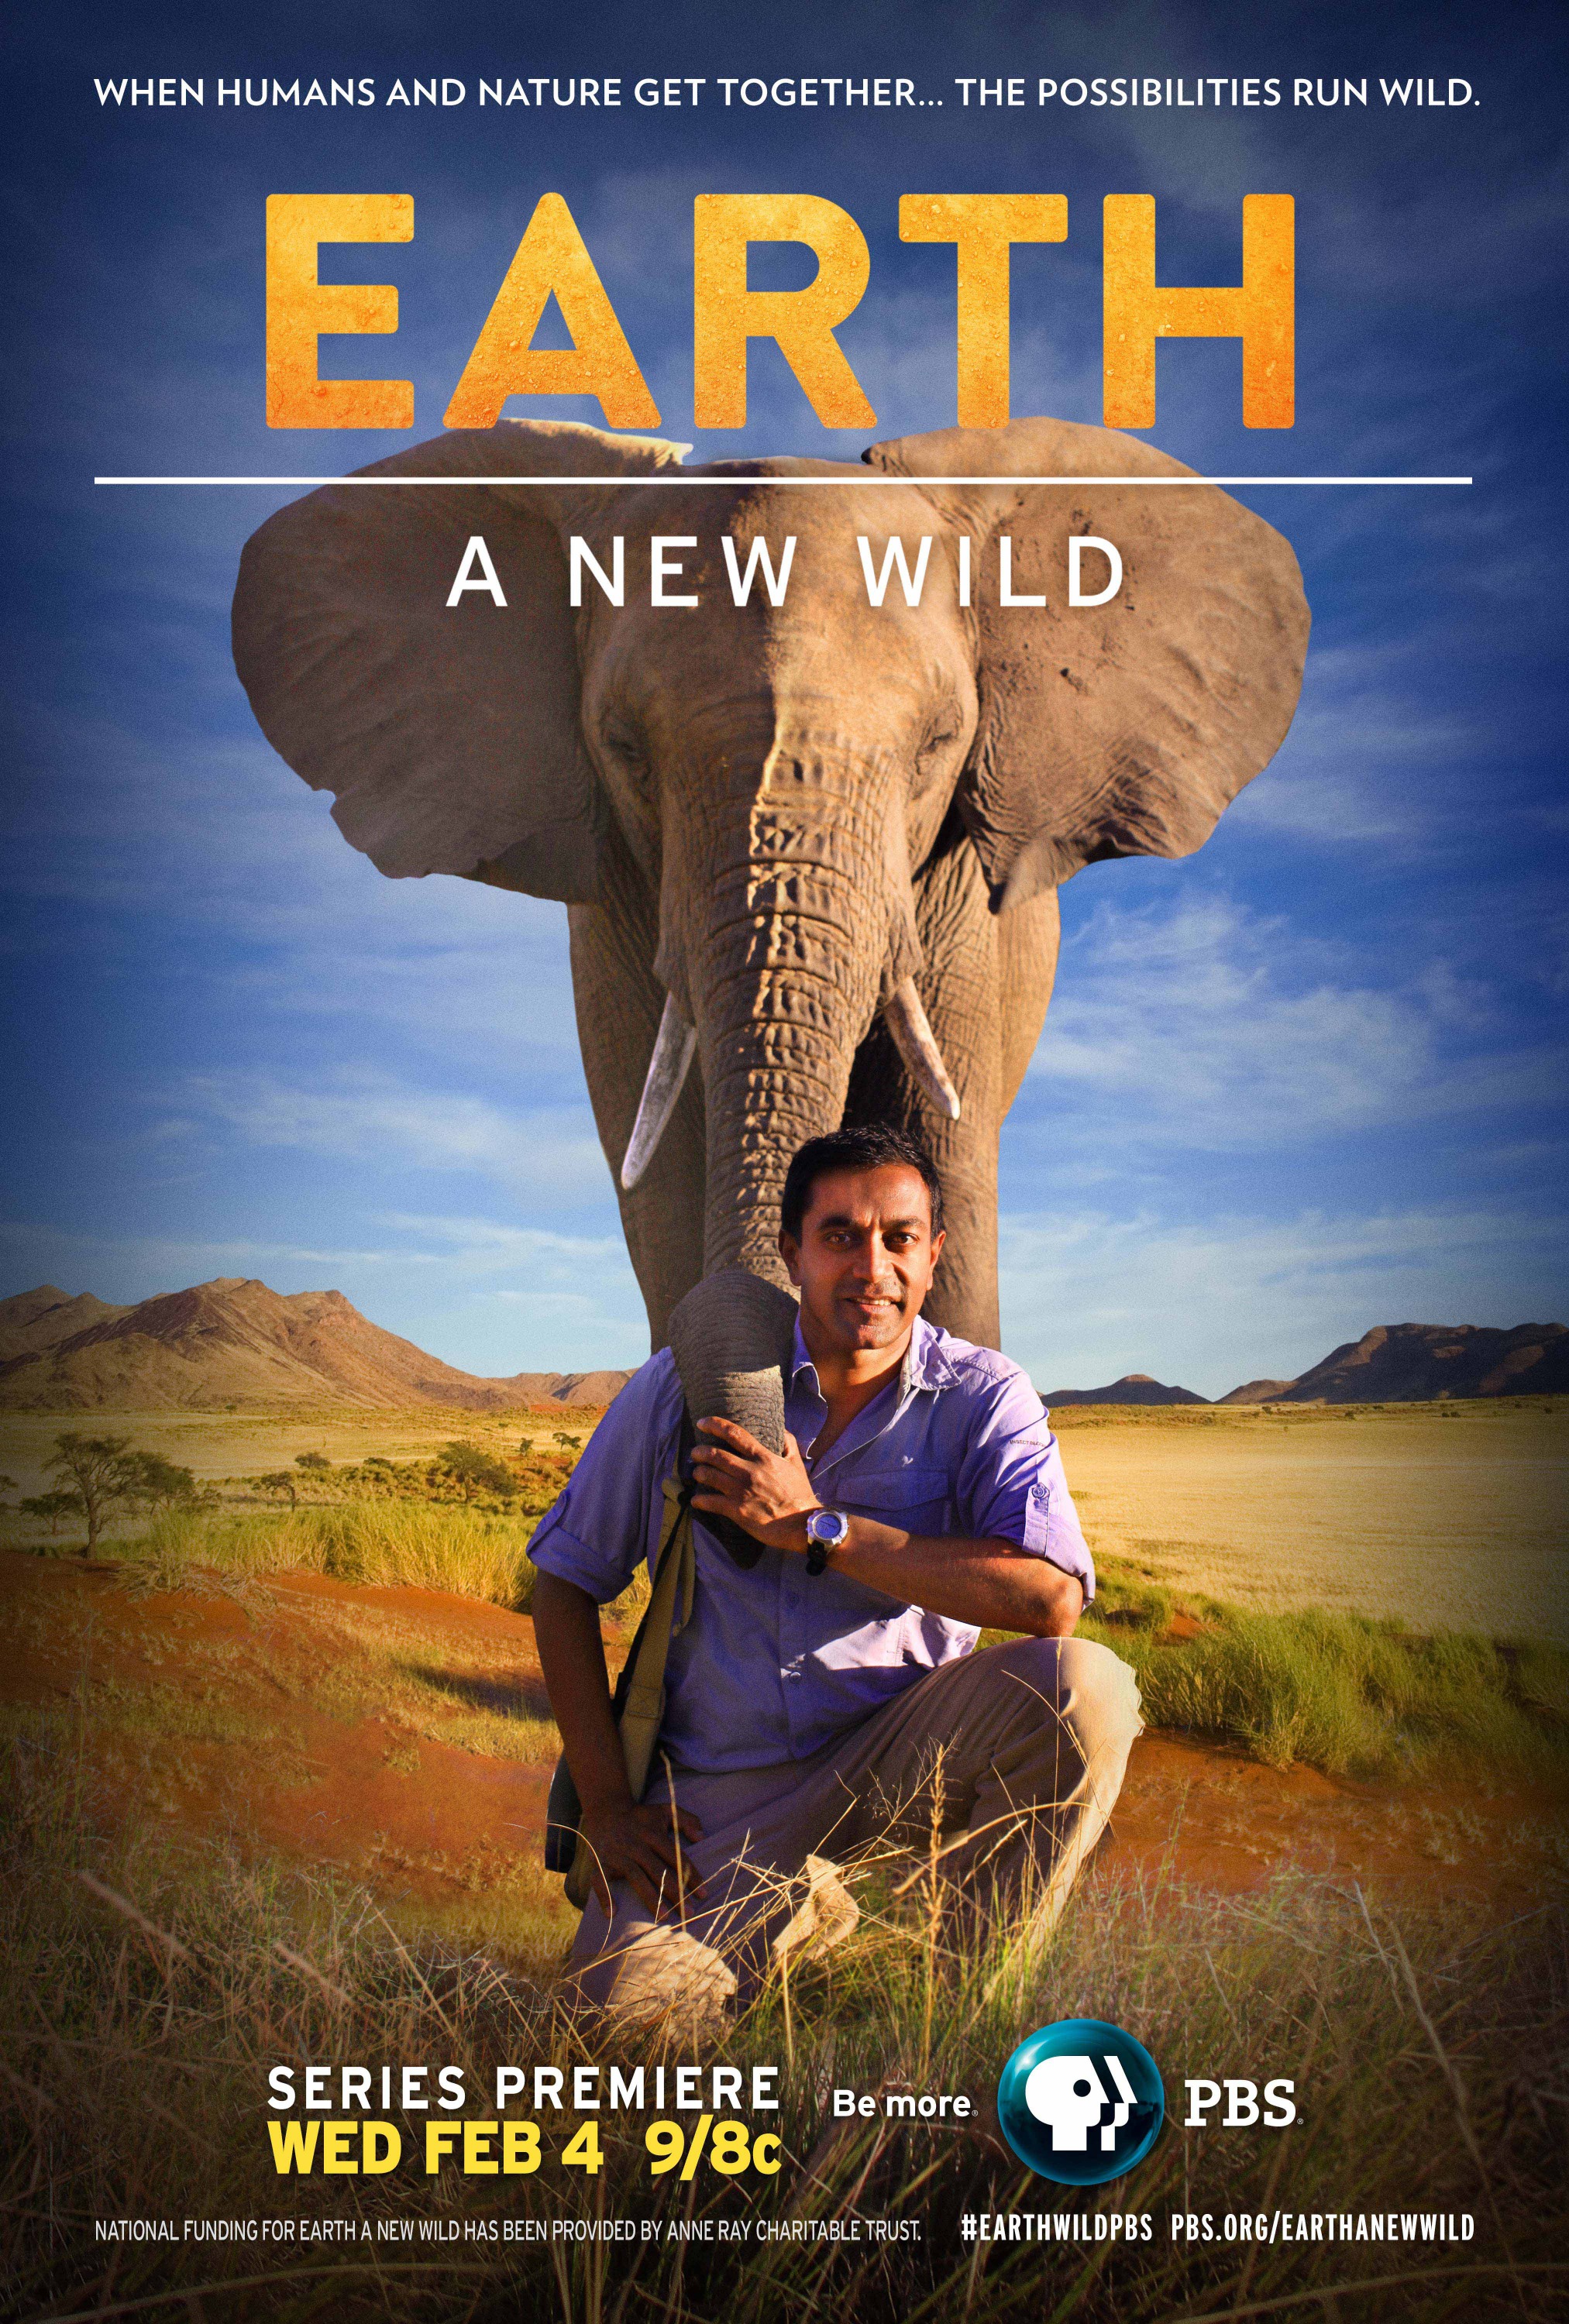 Mega Sized TV Poster Image for EARTH a New Wild 